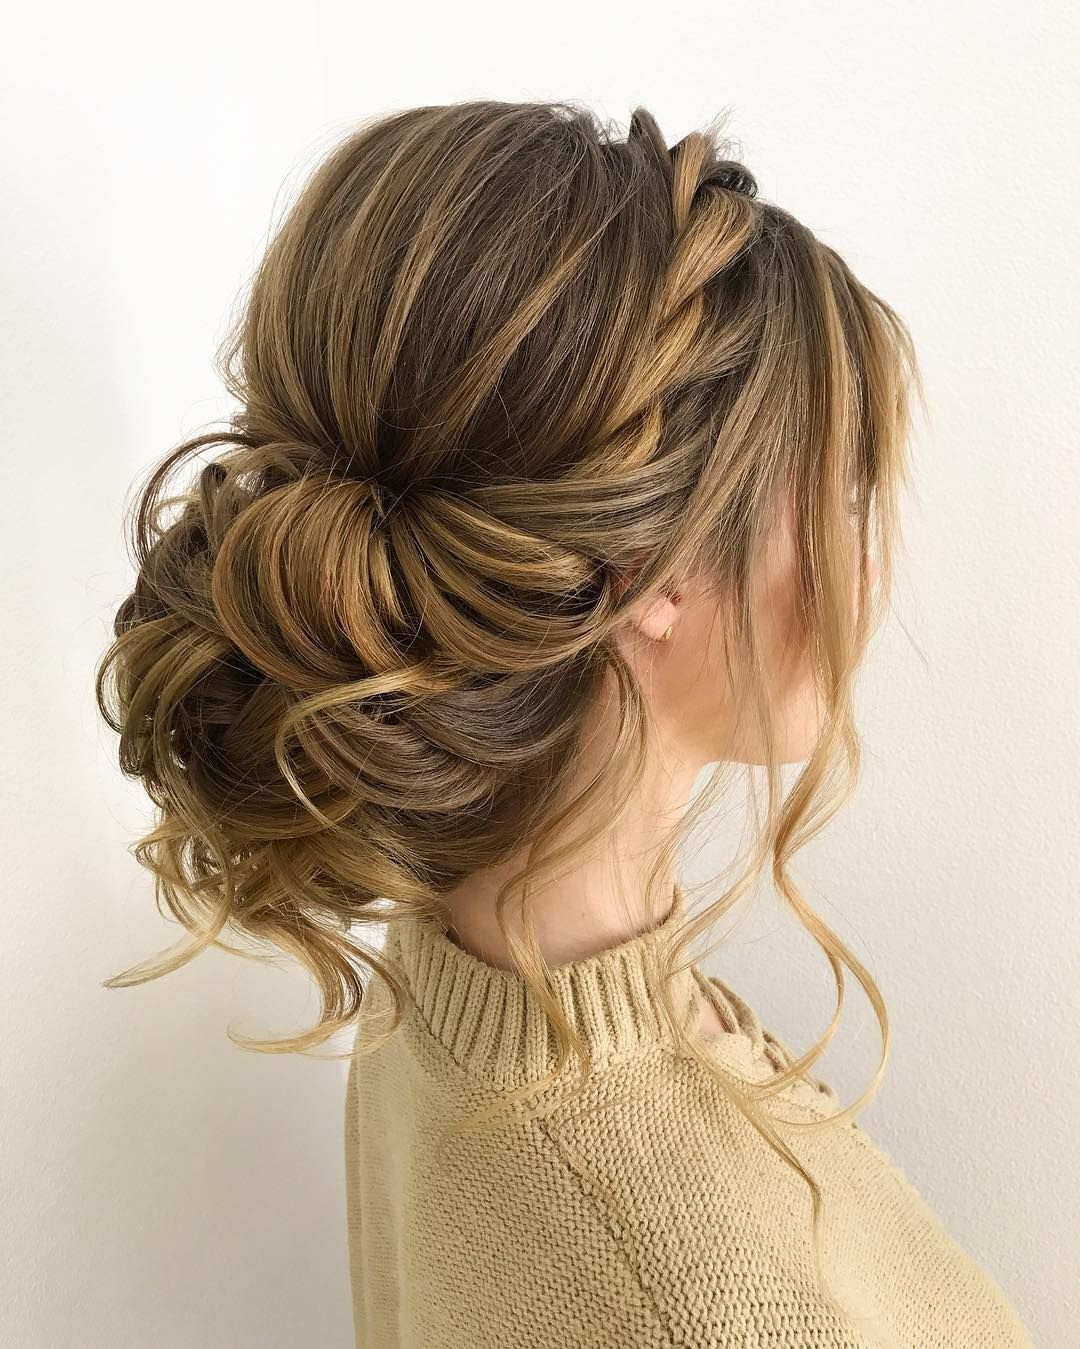 How To Do Wedding Hairstyles Updos
 Gorgeous Wedding Updo Hairstyles That Will Wow Your Big